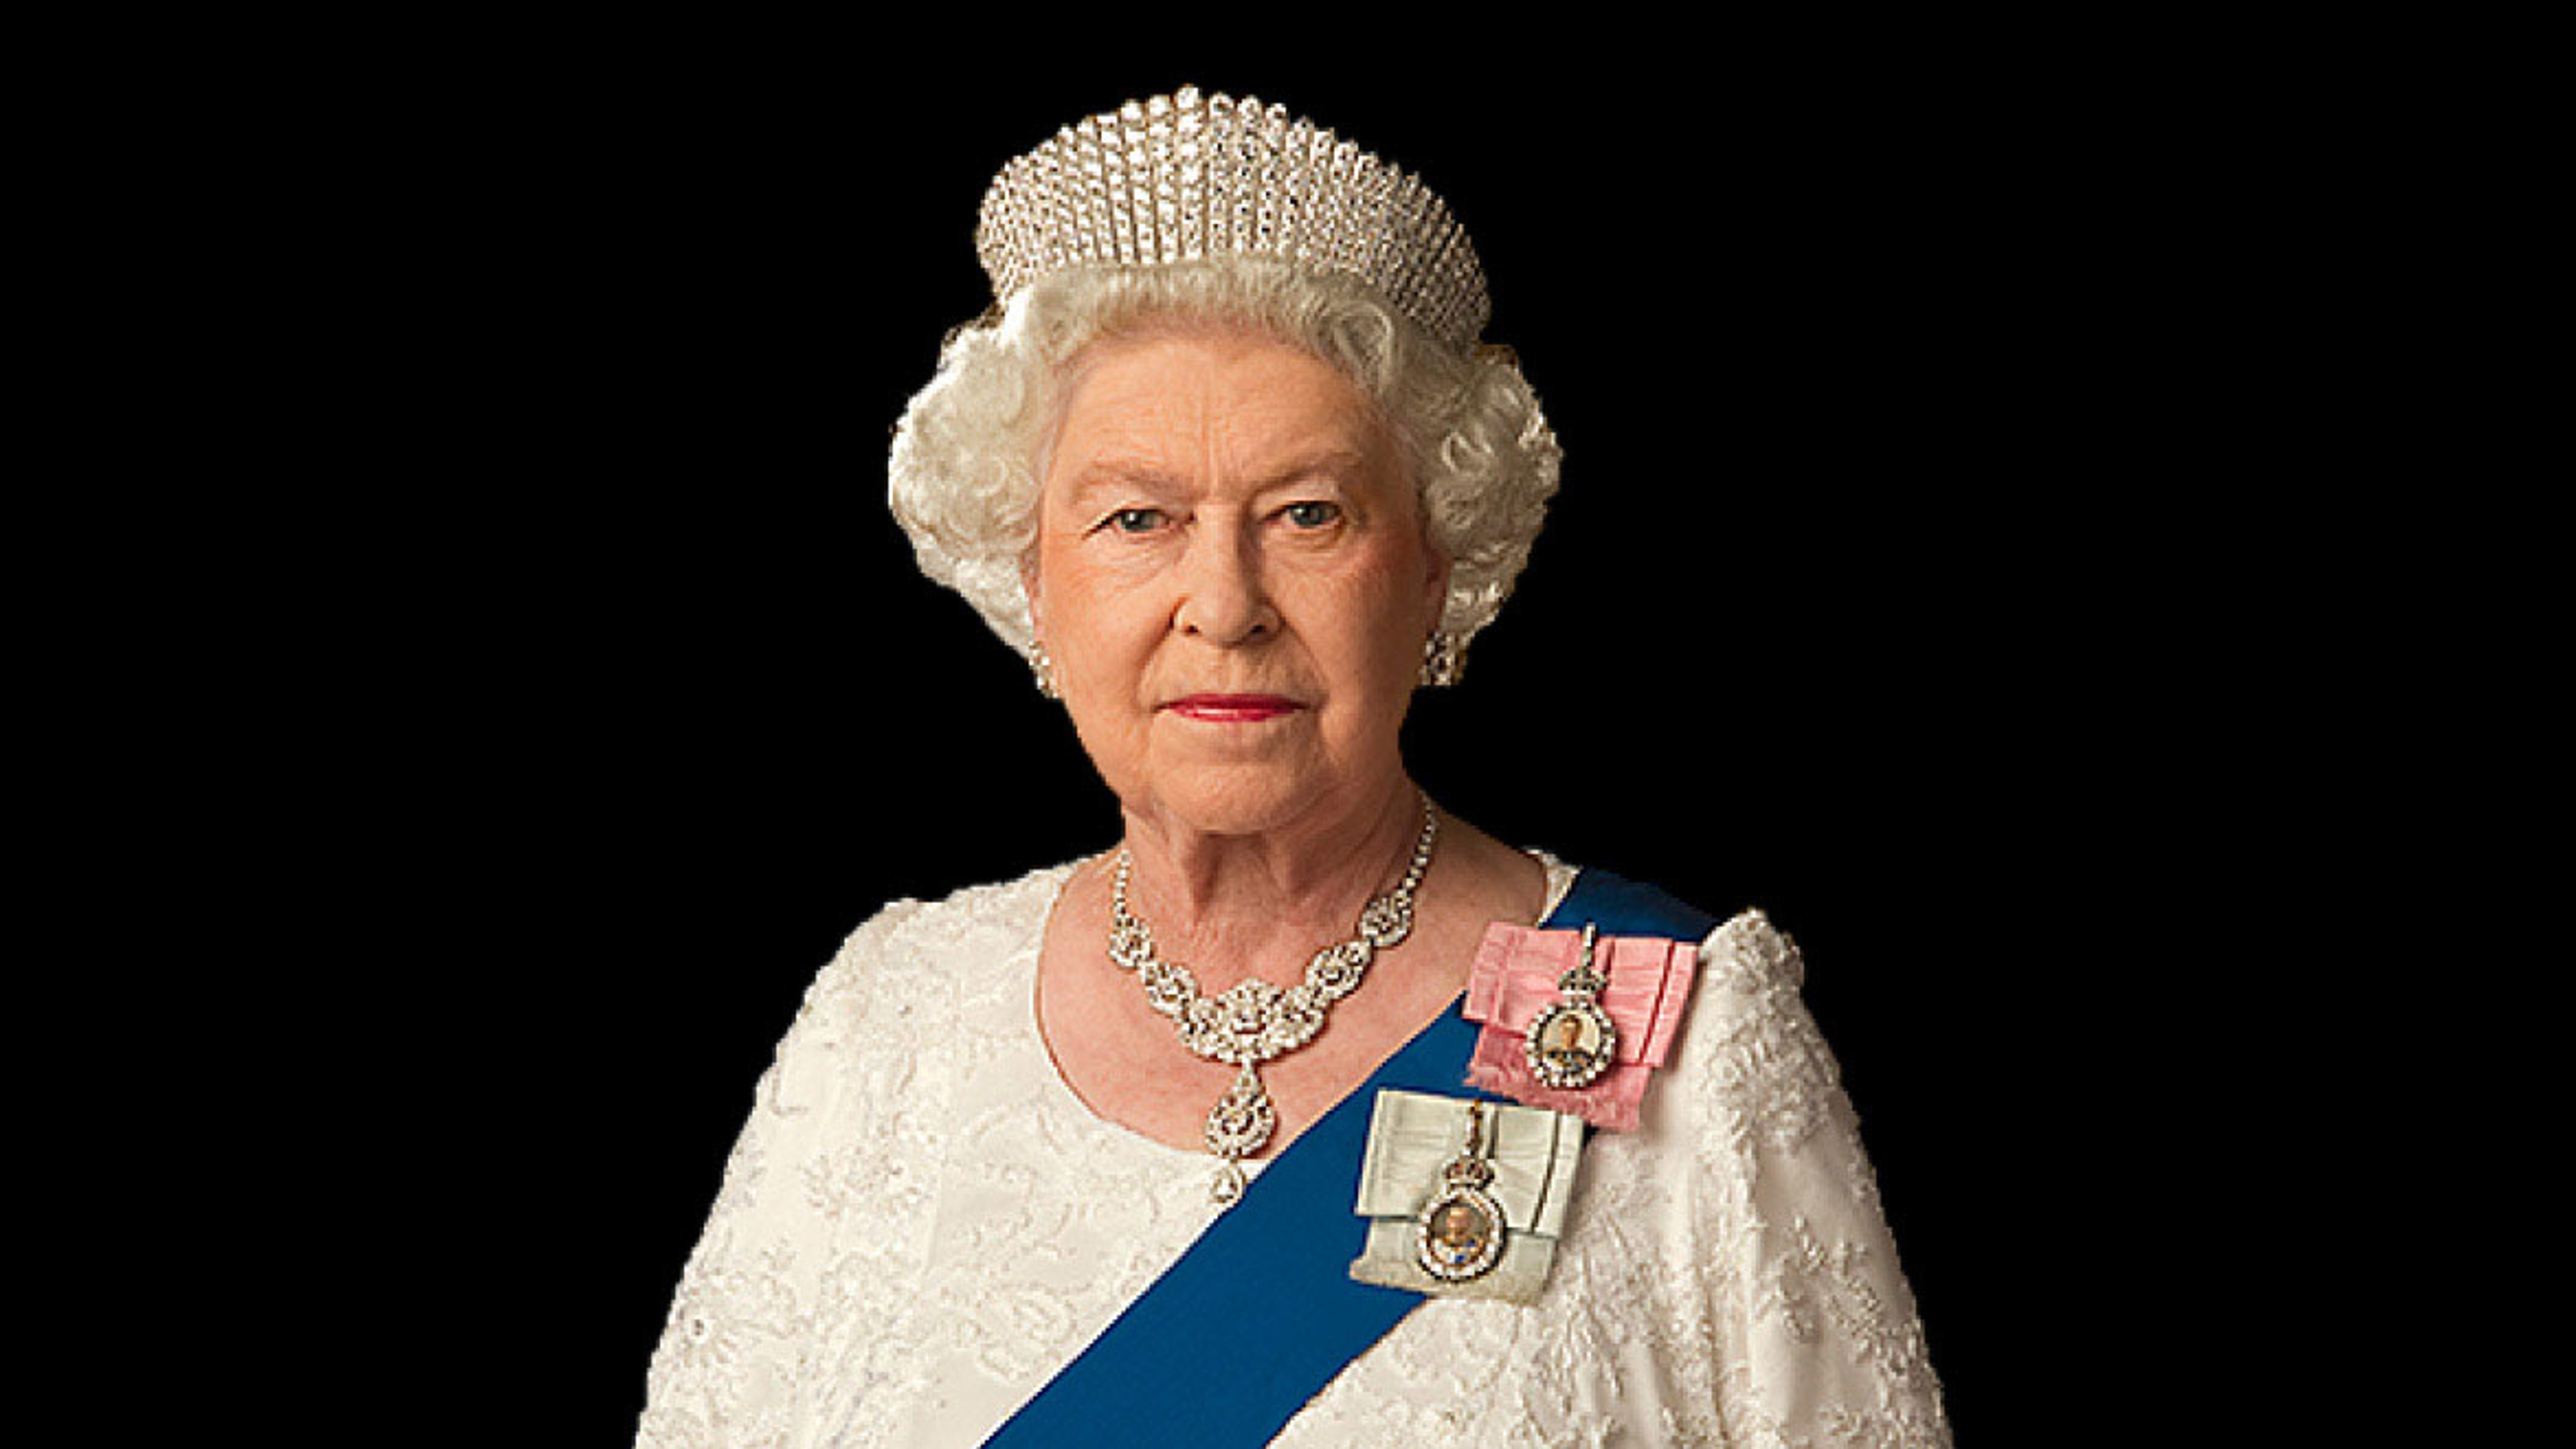 In memory of Her Majesty The Queen